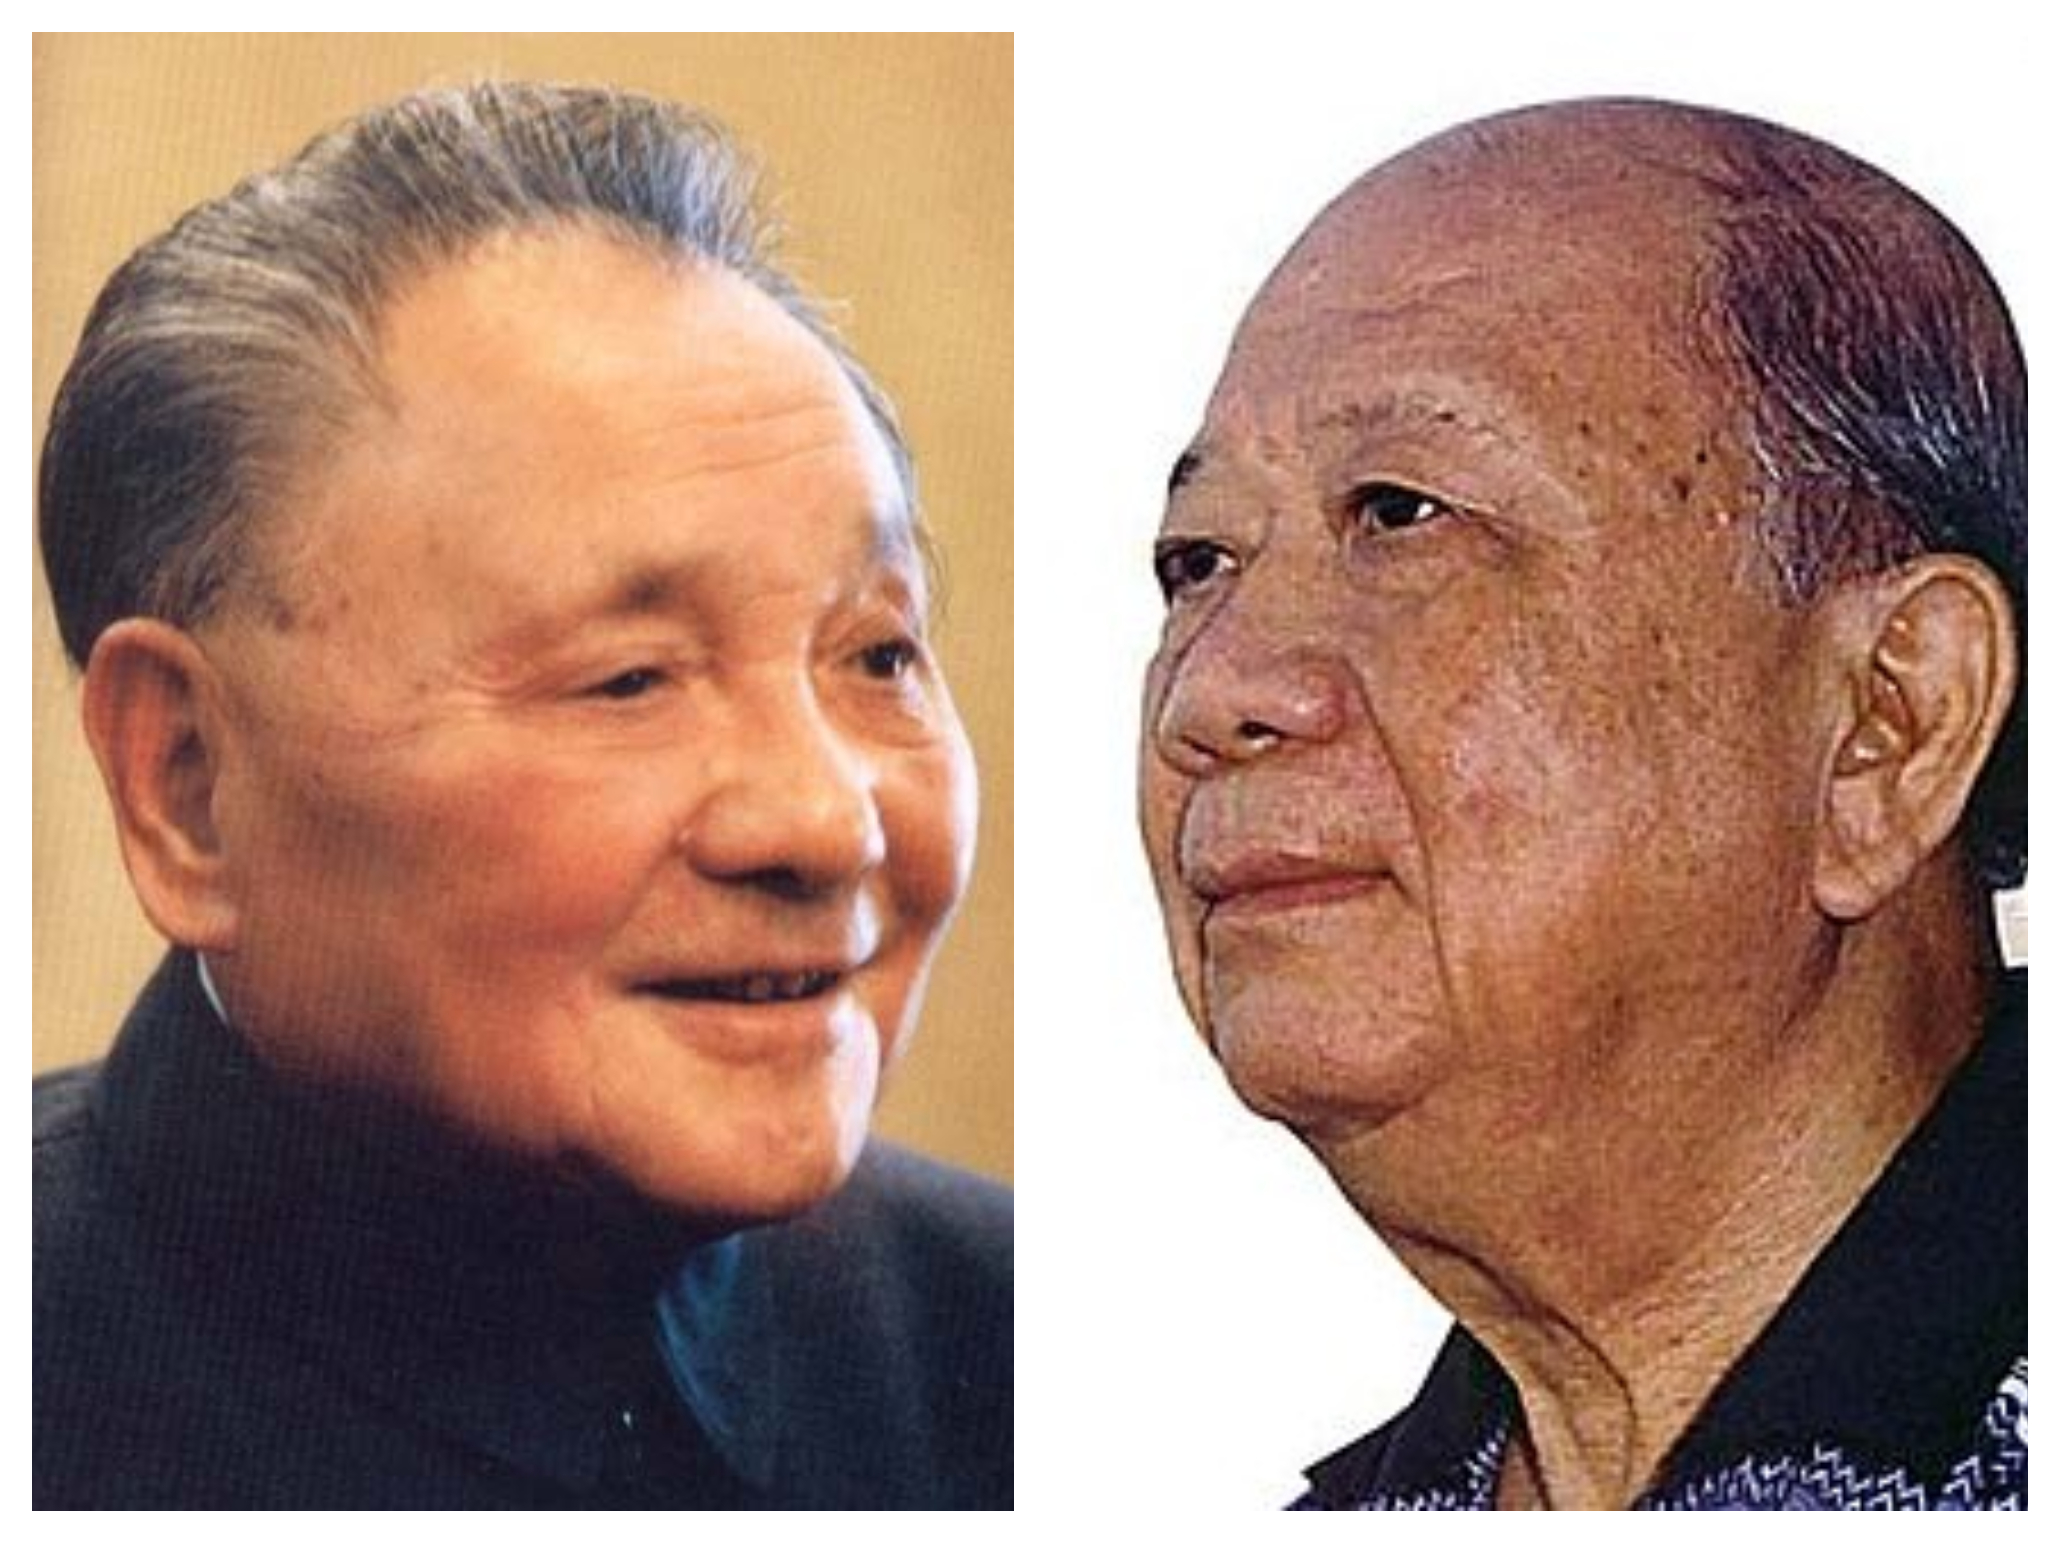 Deng Xiaoping (left) and Chin Peng. Images from Alchetron and Wikipedia